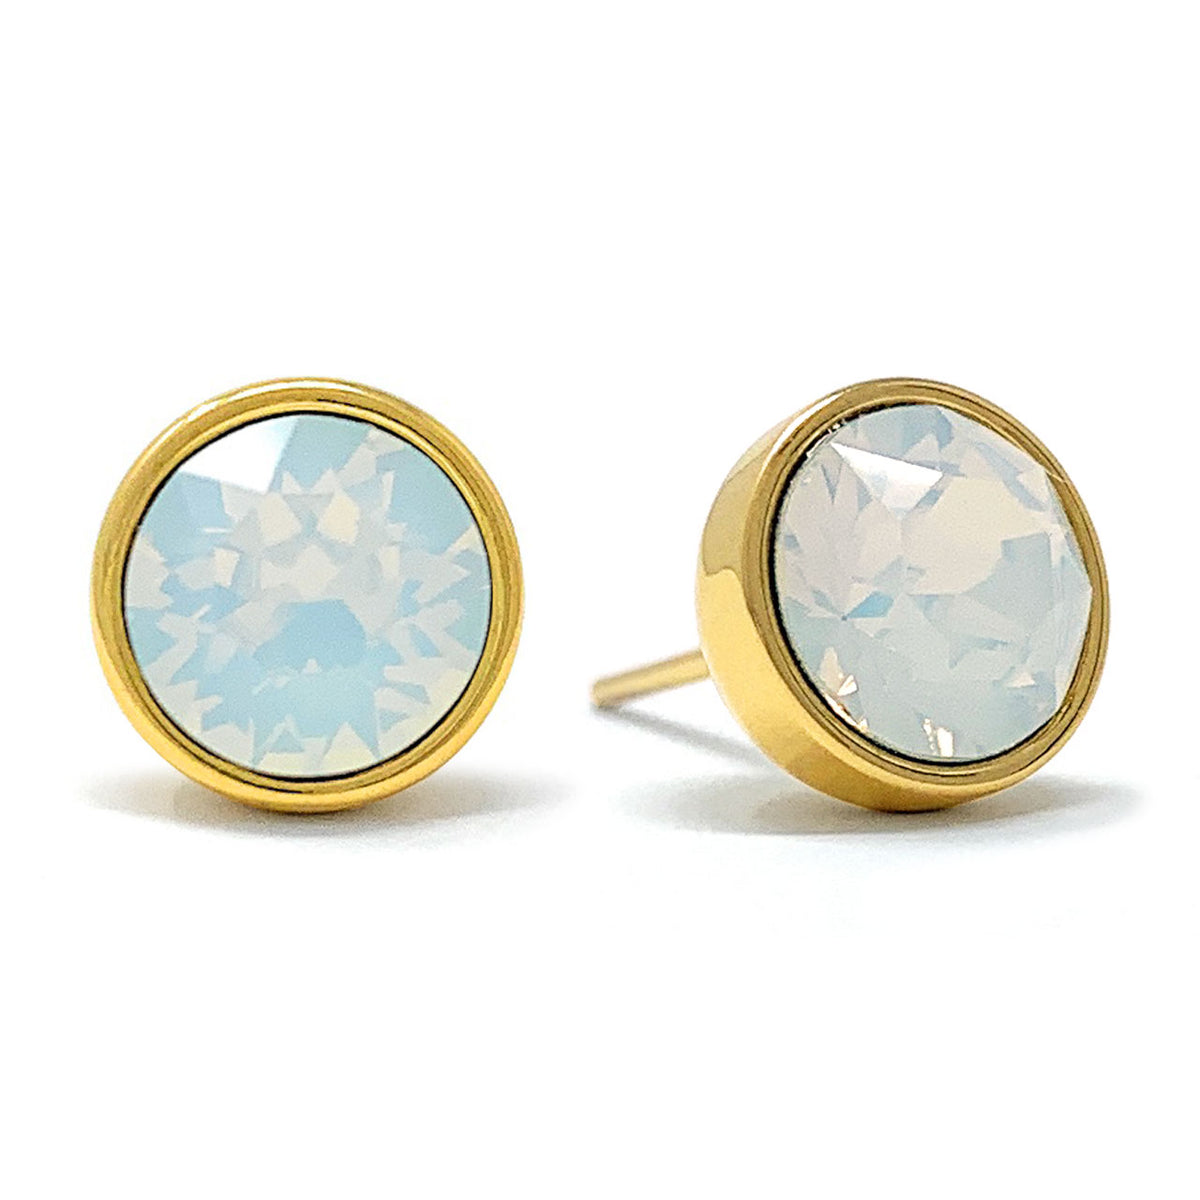 Harley Stud Earrings with Ivory White Round Opals from Swarovski Gold Plated - Ed Heart